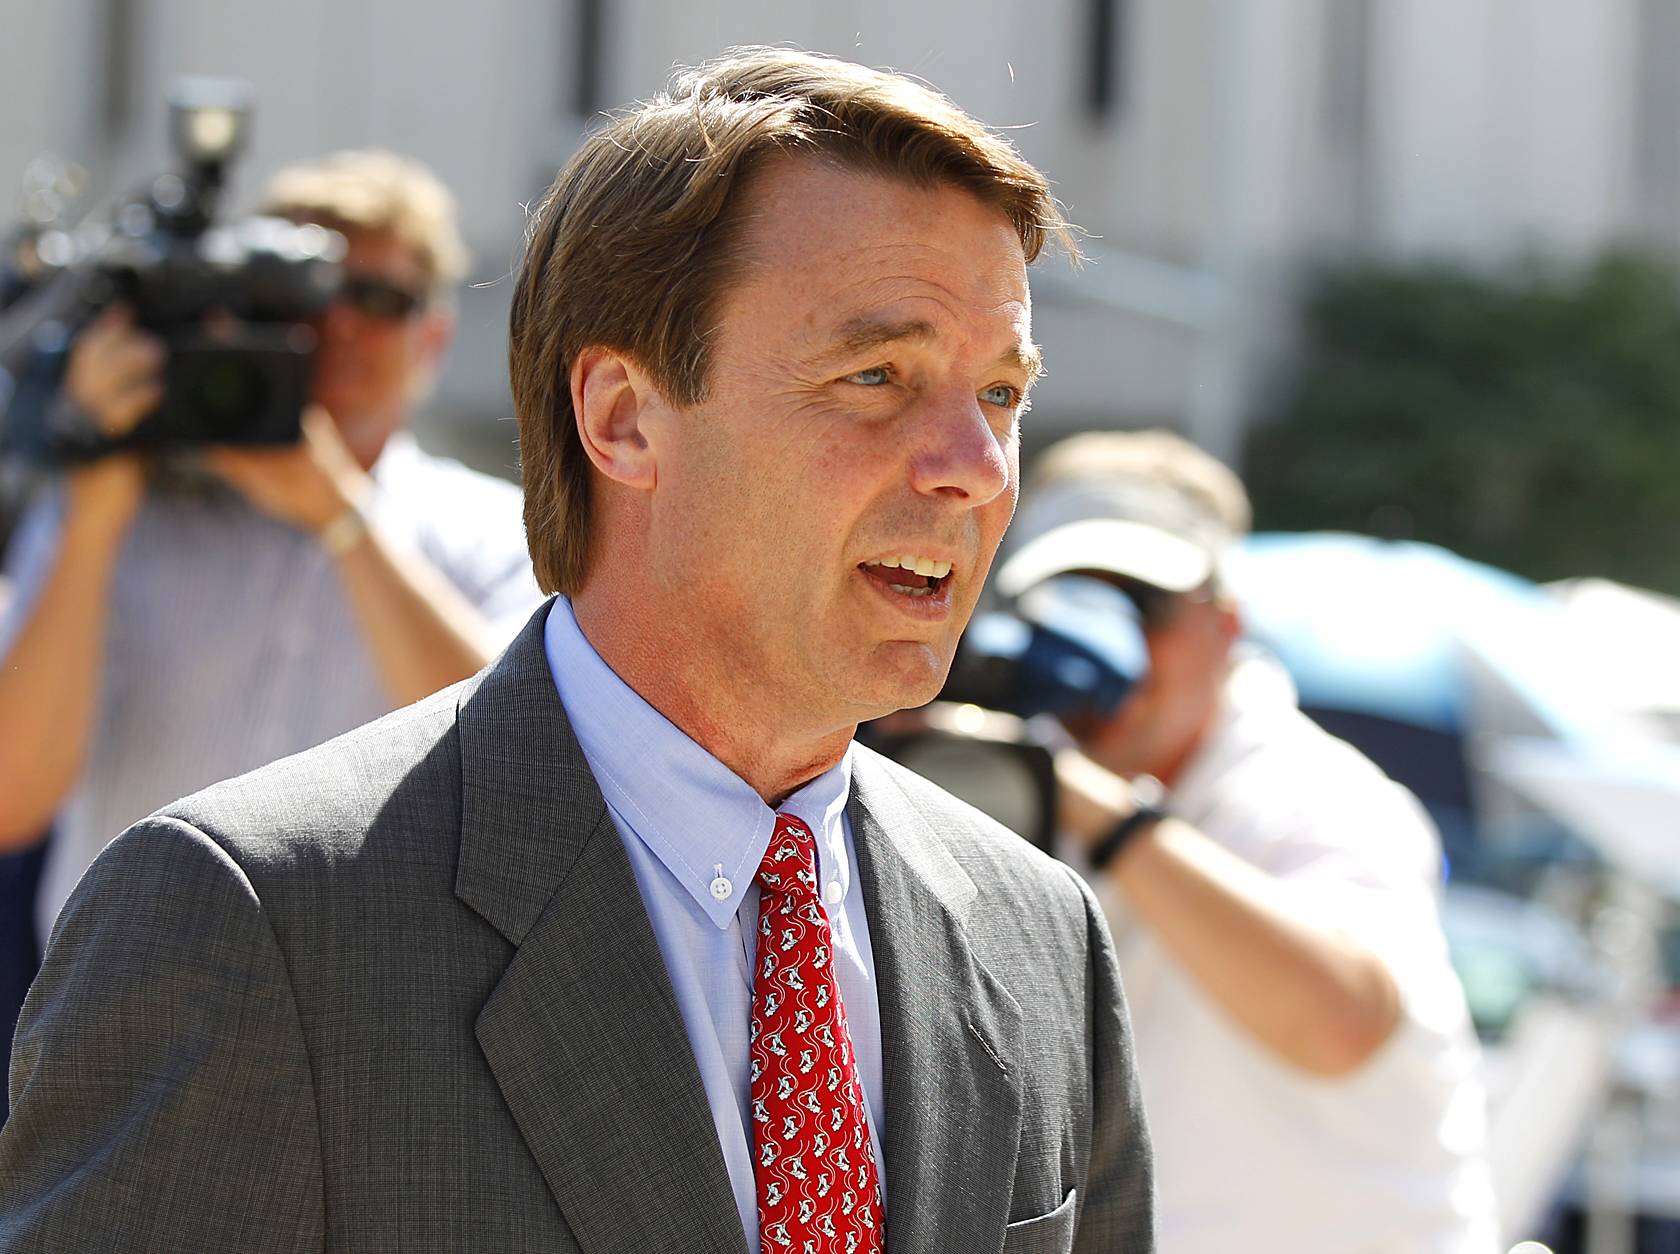 John Edwards Found Not Guilty&nbsp; - Former presidential hopeful John Edwards was found not guilty on one of six campaign fraud charges, and a mistrial was ruled on the five other charges on May 31. Edwards was accused of masterminding a plan to use money from two wealthy donors to hide his pregnant mistress during his run for the White House in 2008.&nbsp;(Photo: AP Photo/Chuck Burton)